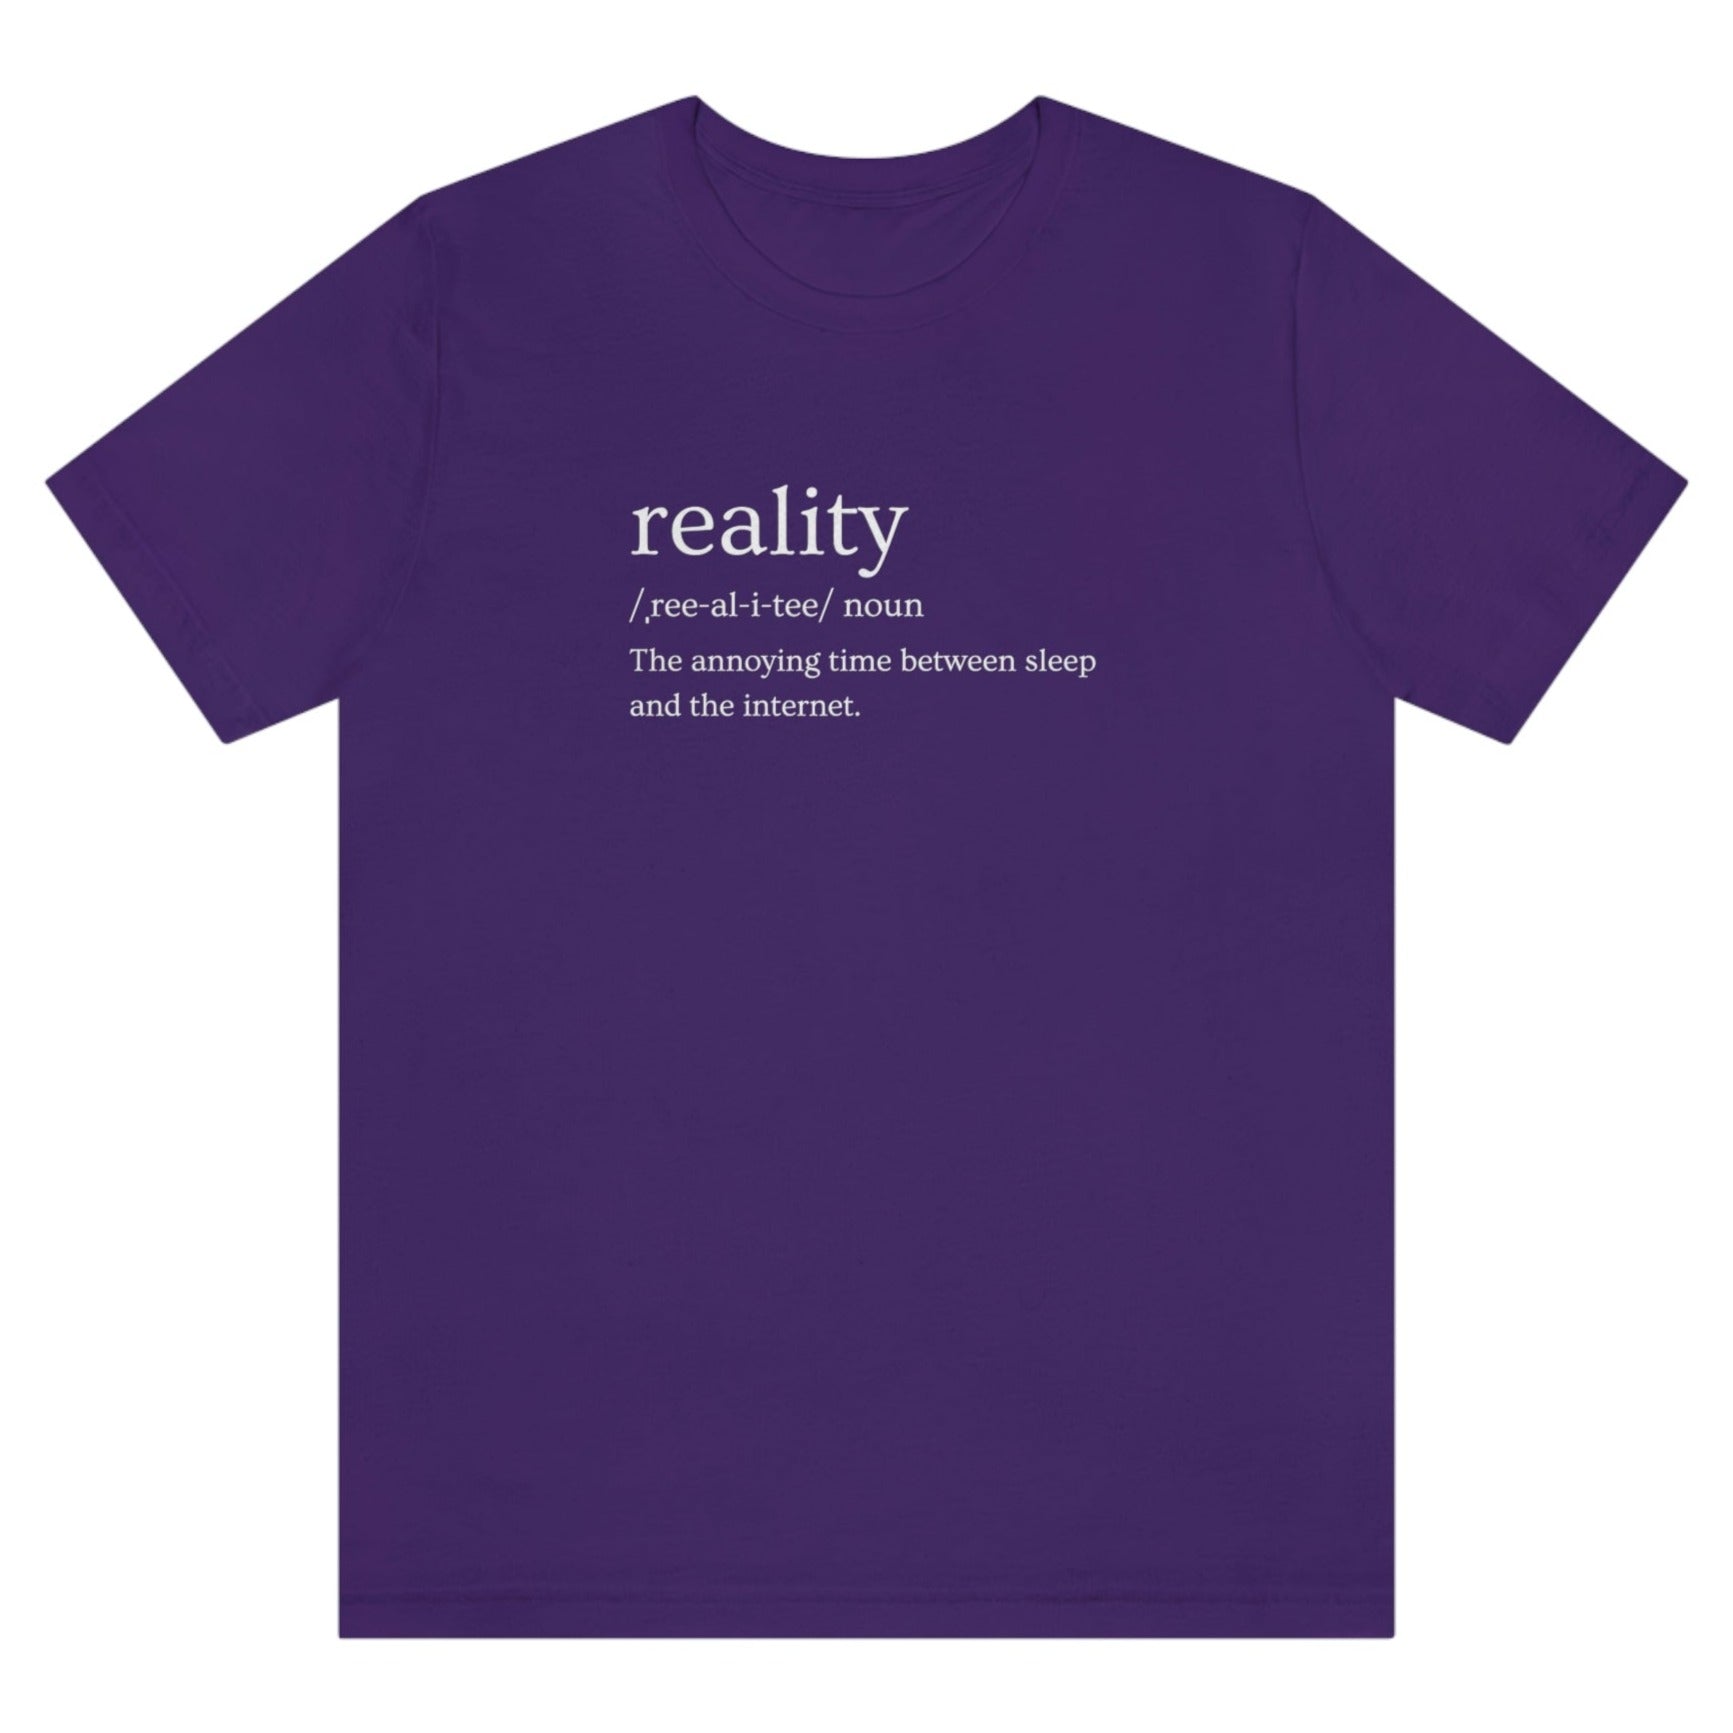 reality-the-annoying-time-between-sleep-and-the-internet-team-purple-t-shirt